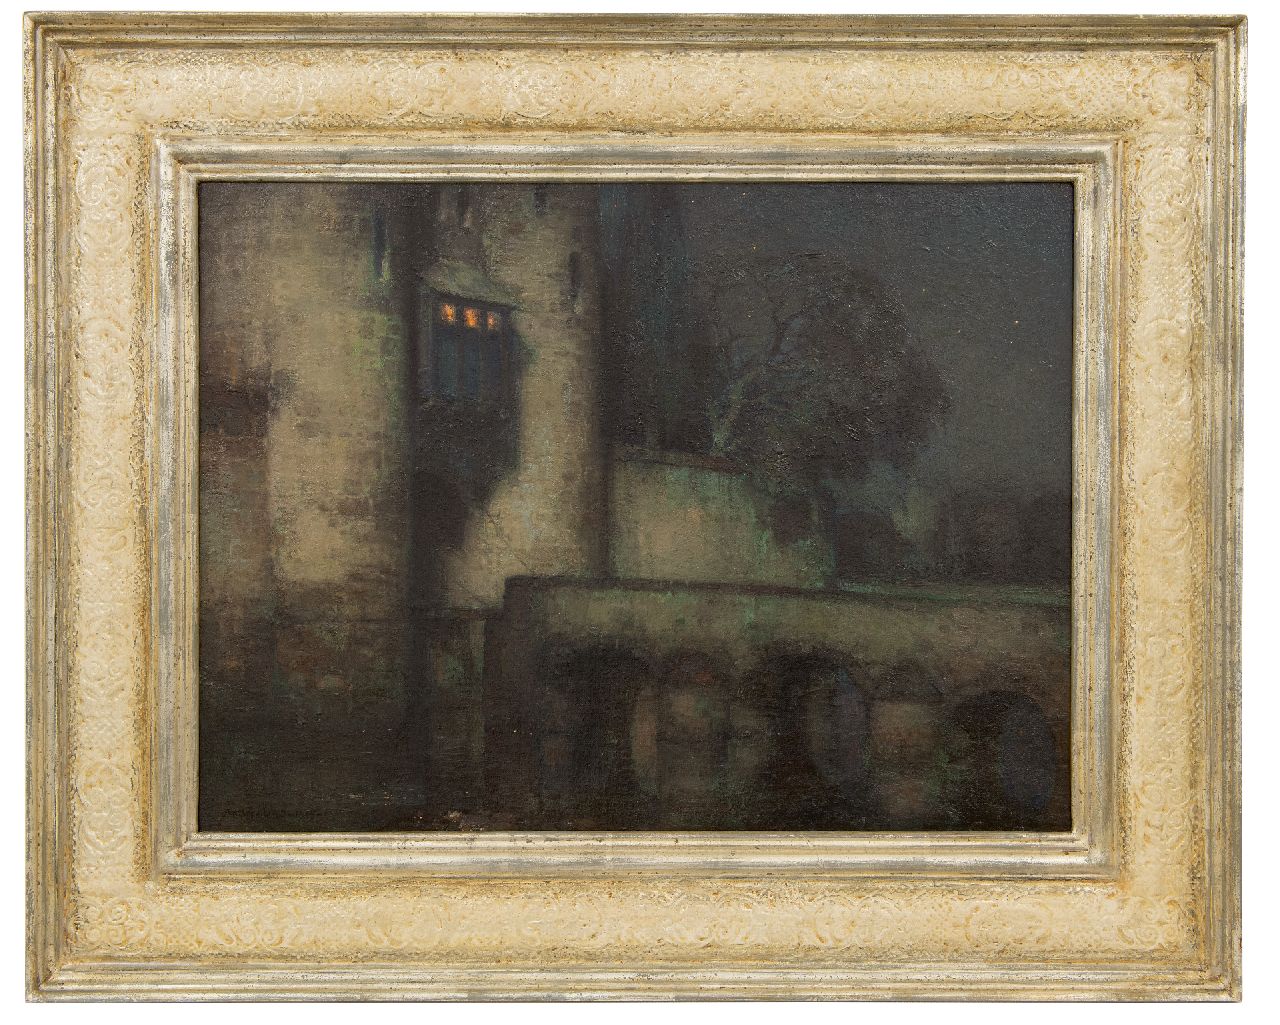 Bogaerts J.J.M.  | Johannes Jacobus Maria 'Jan' Bogaerts | Paintings offered for sale |   Castle with drawbridge at night, oil on canvas 45.4 x 60.3 cm, signed l.l. and dated 1924